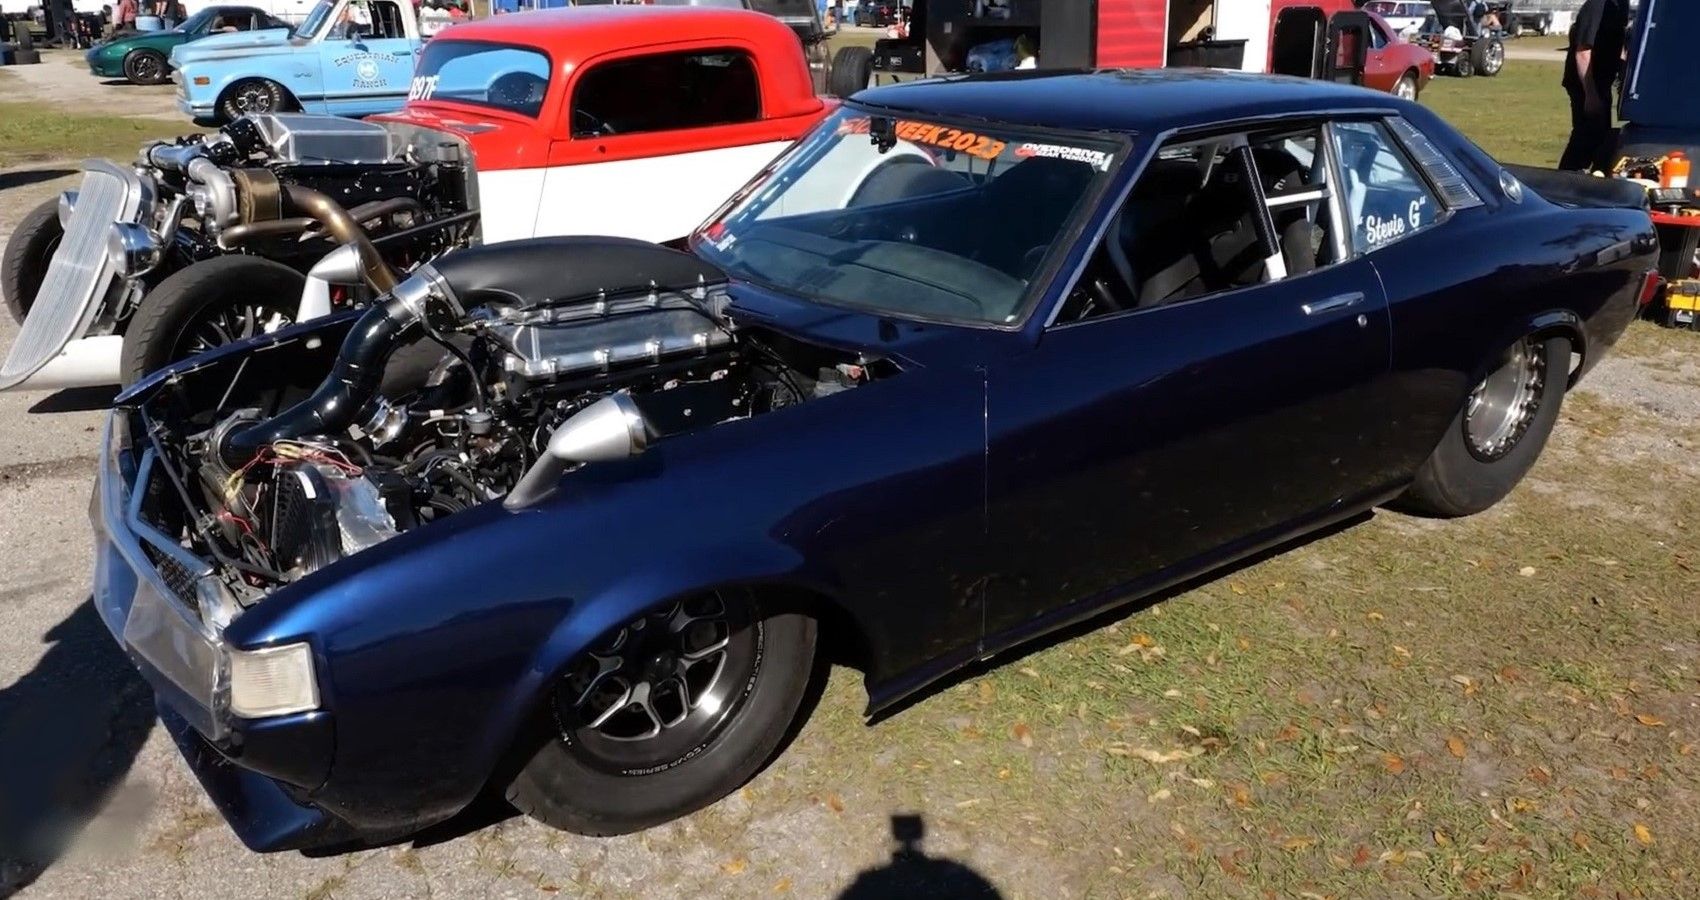 Turbocharged 388 cid LS-Swapped 1973 Toyota Celica, front quarter view